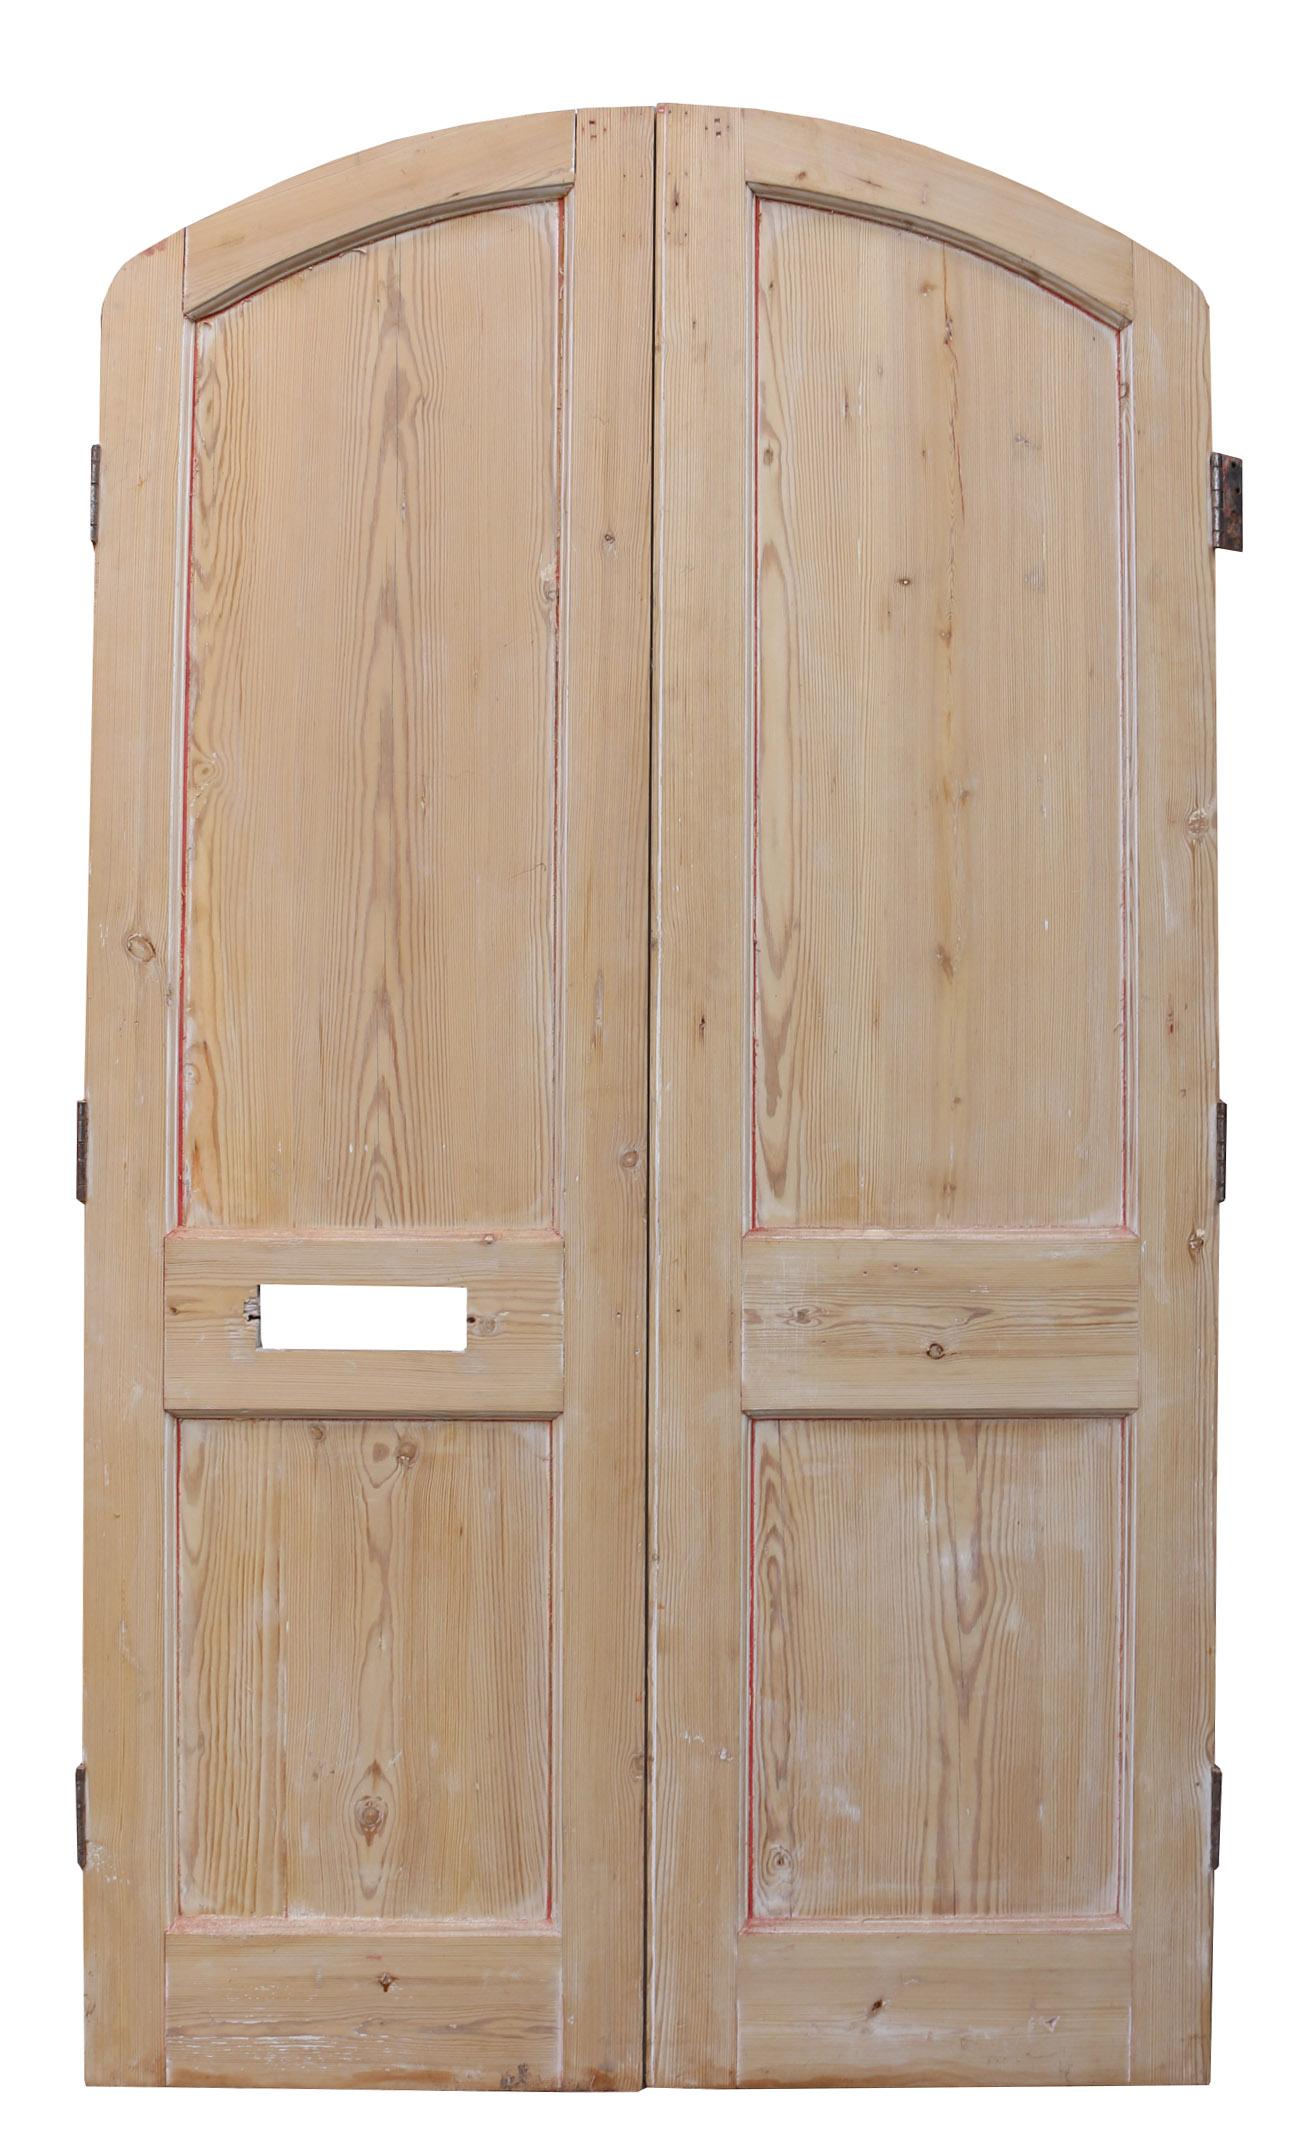 Pair of antique arched pine exterior doors
Height 204.5 cm (maximum) 183 cm (to the shoulder), weight 44 kg.